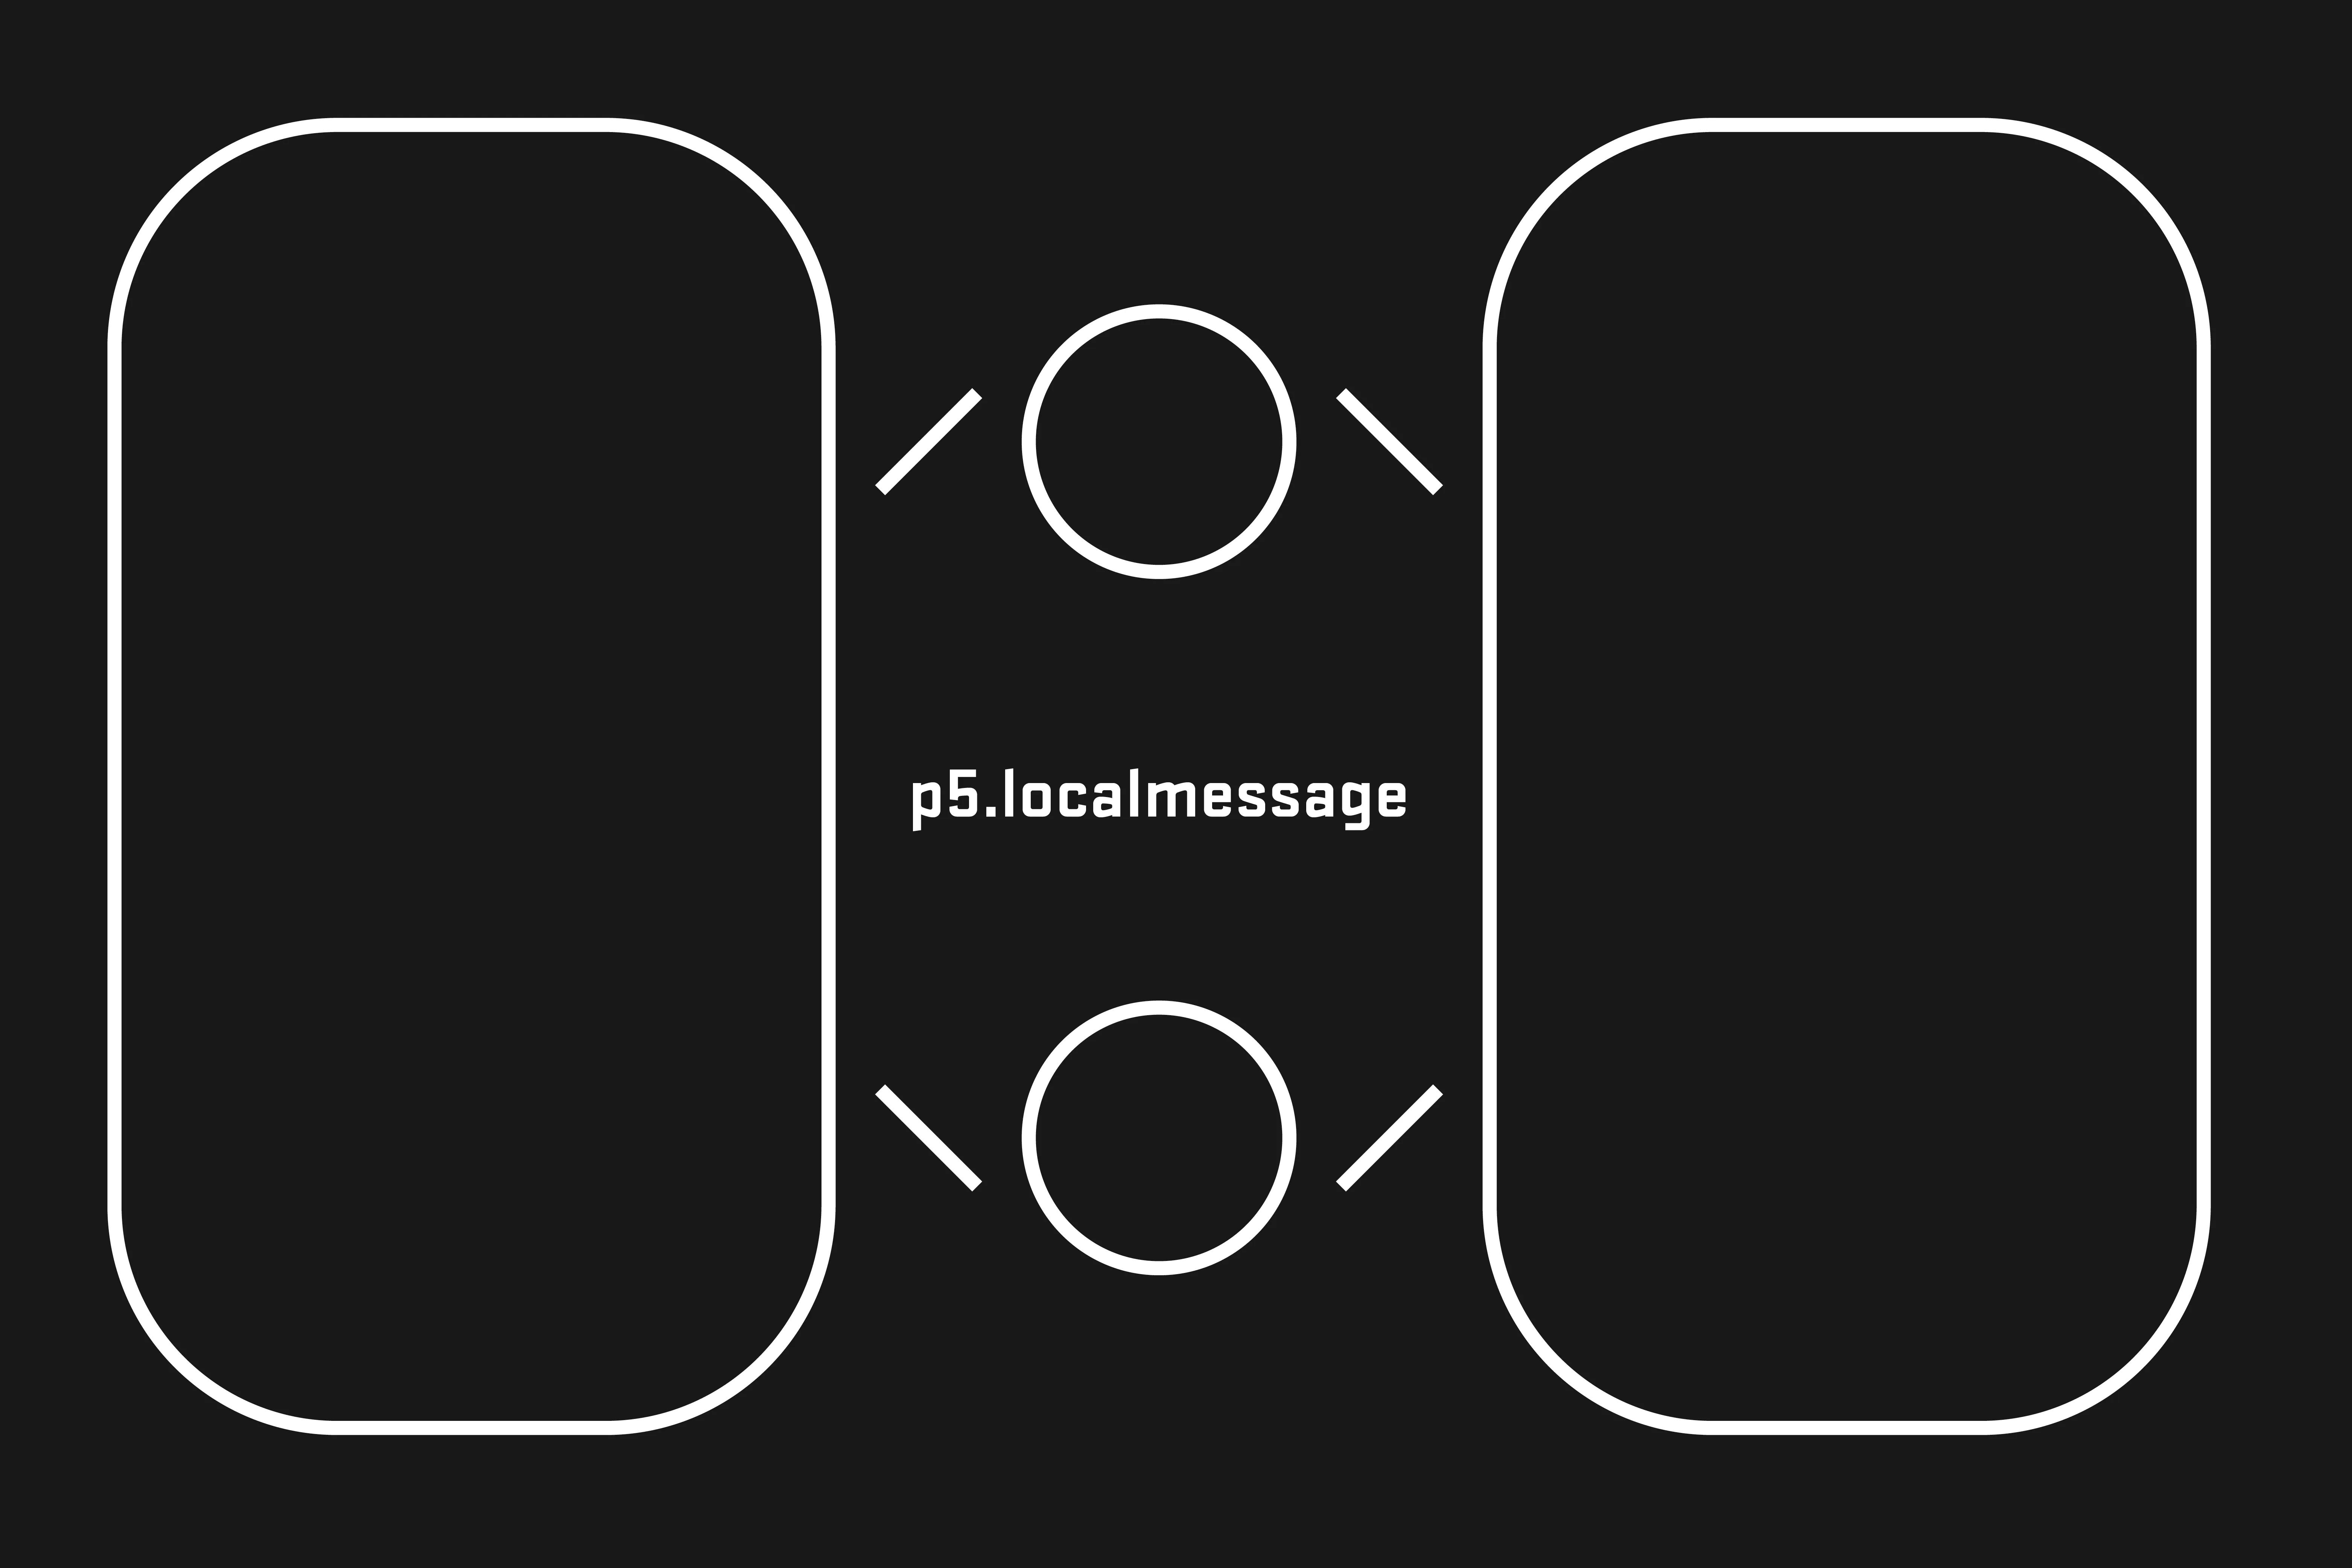 Two rounded rectangles with ellipses between. connecting lines give the effect of messages being sent between the rectangles via the ellipses.